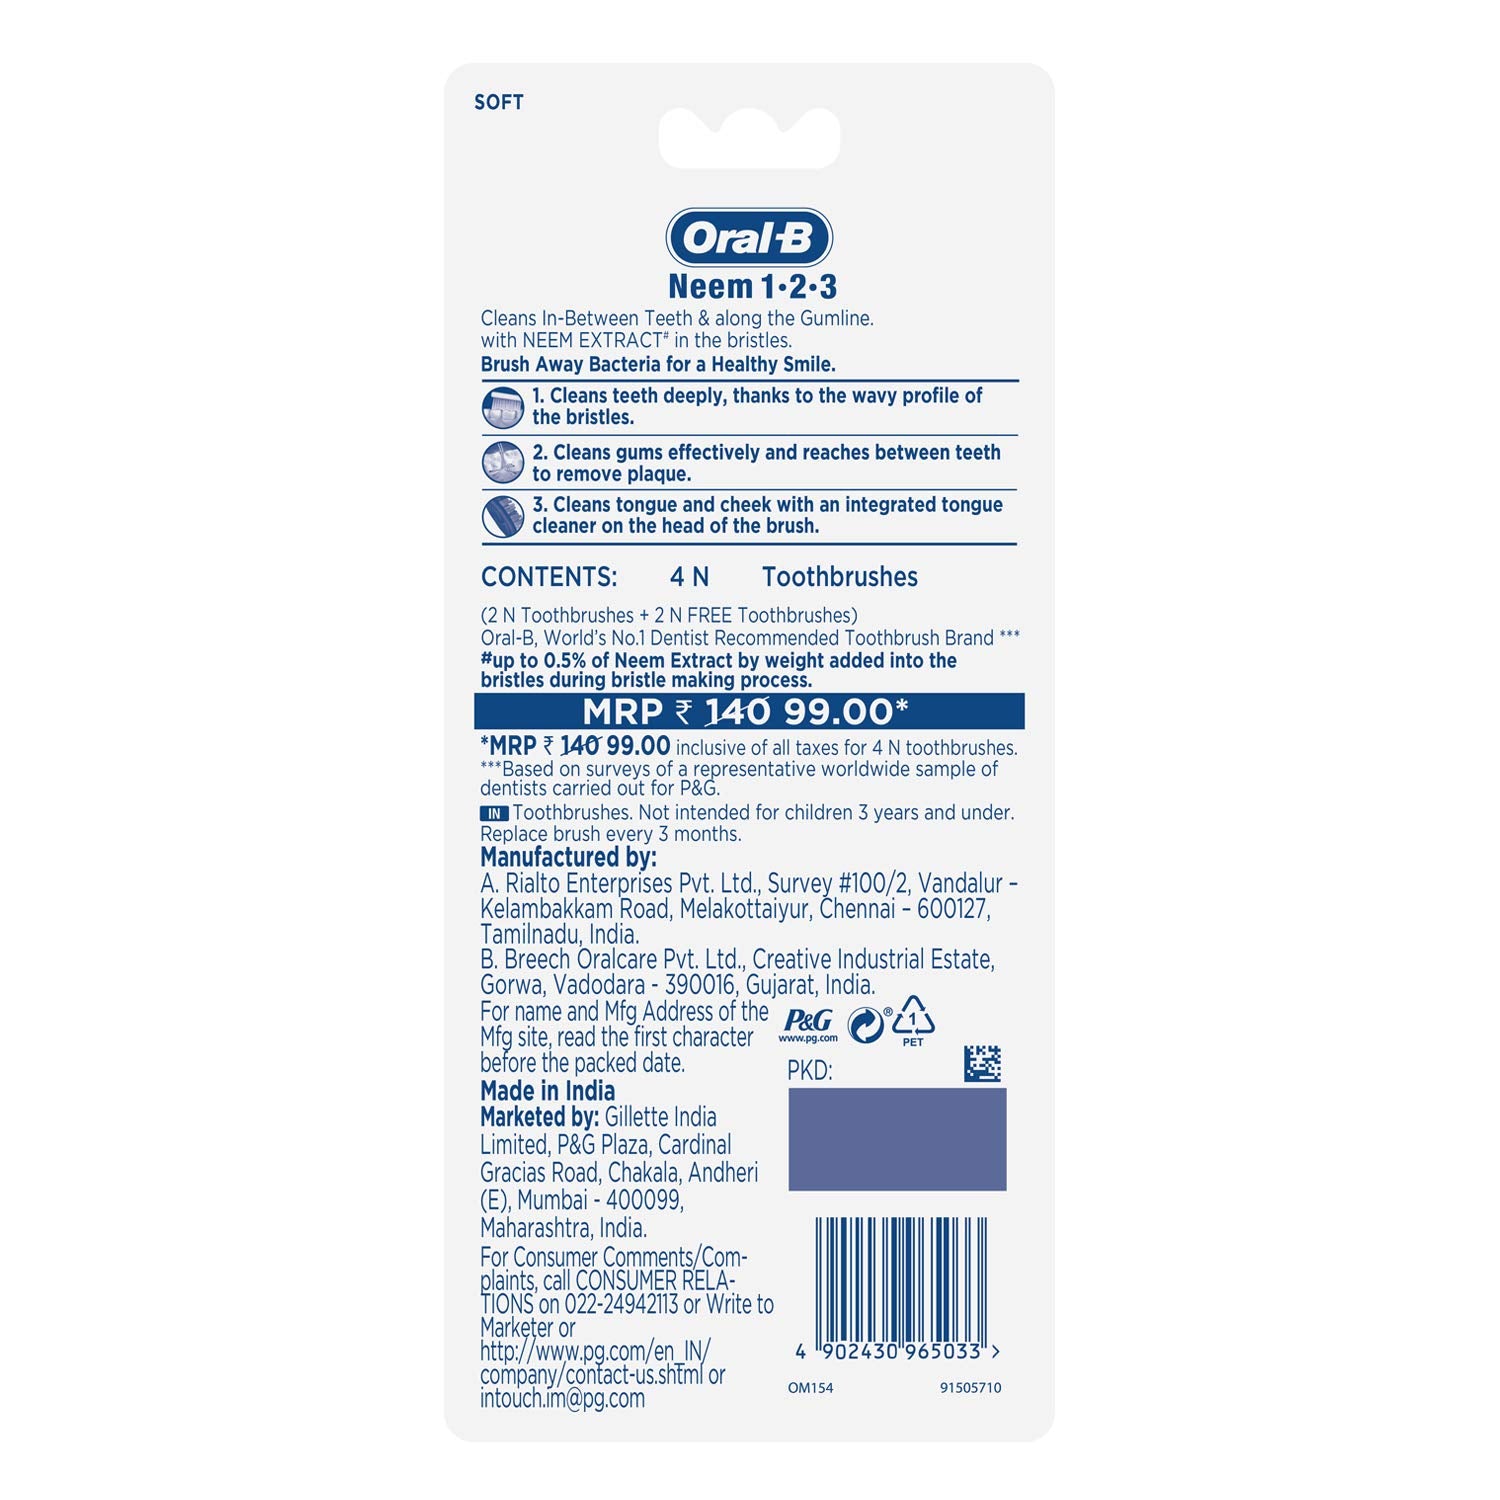 Oral-B 123 Neem Extract Toothbrush (Buy 2 Get 2 Free)